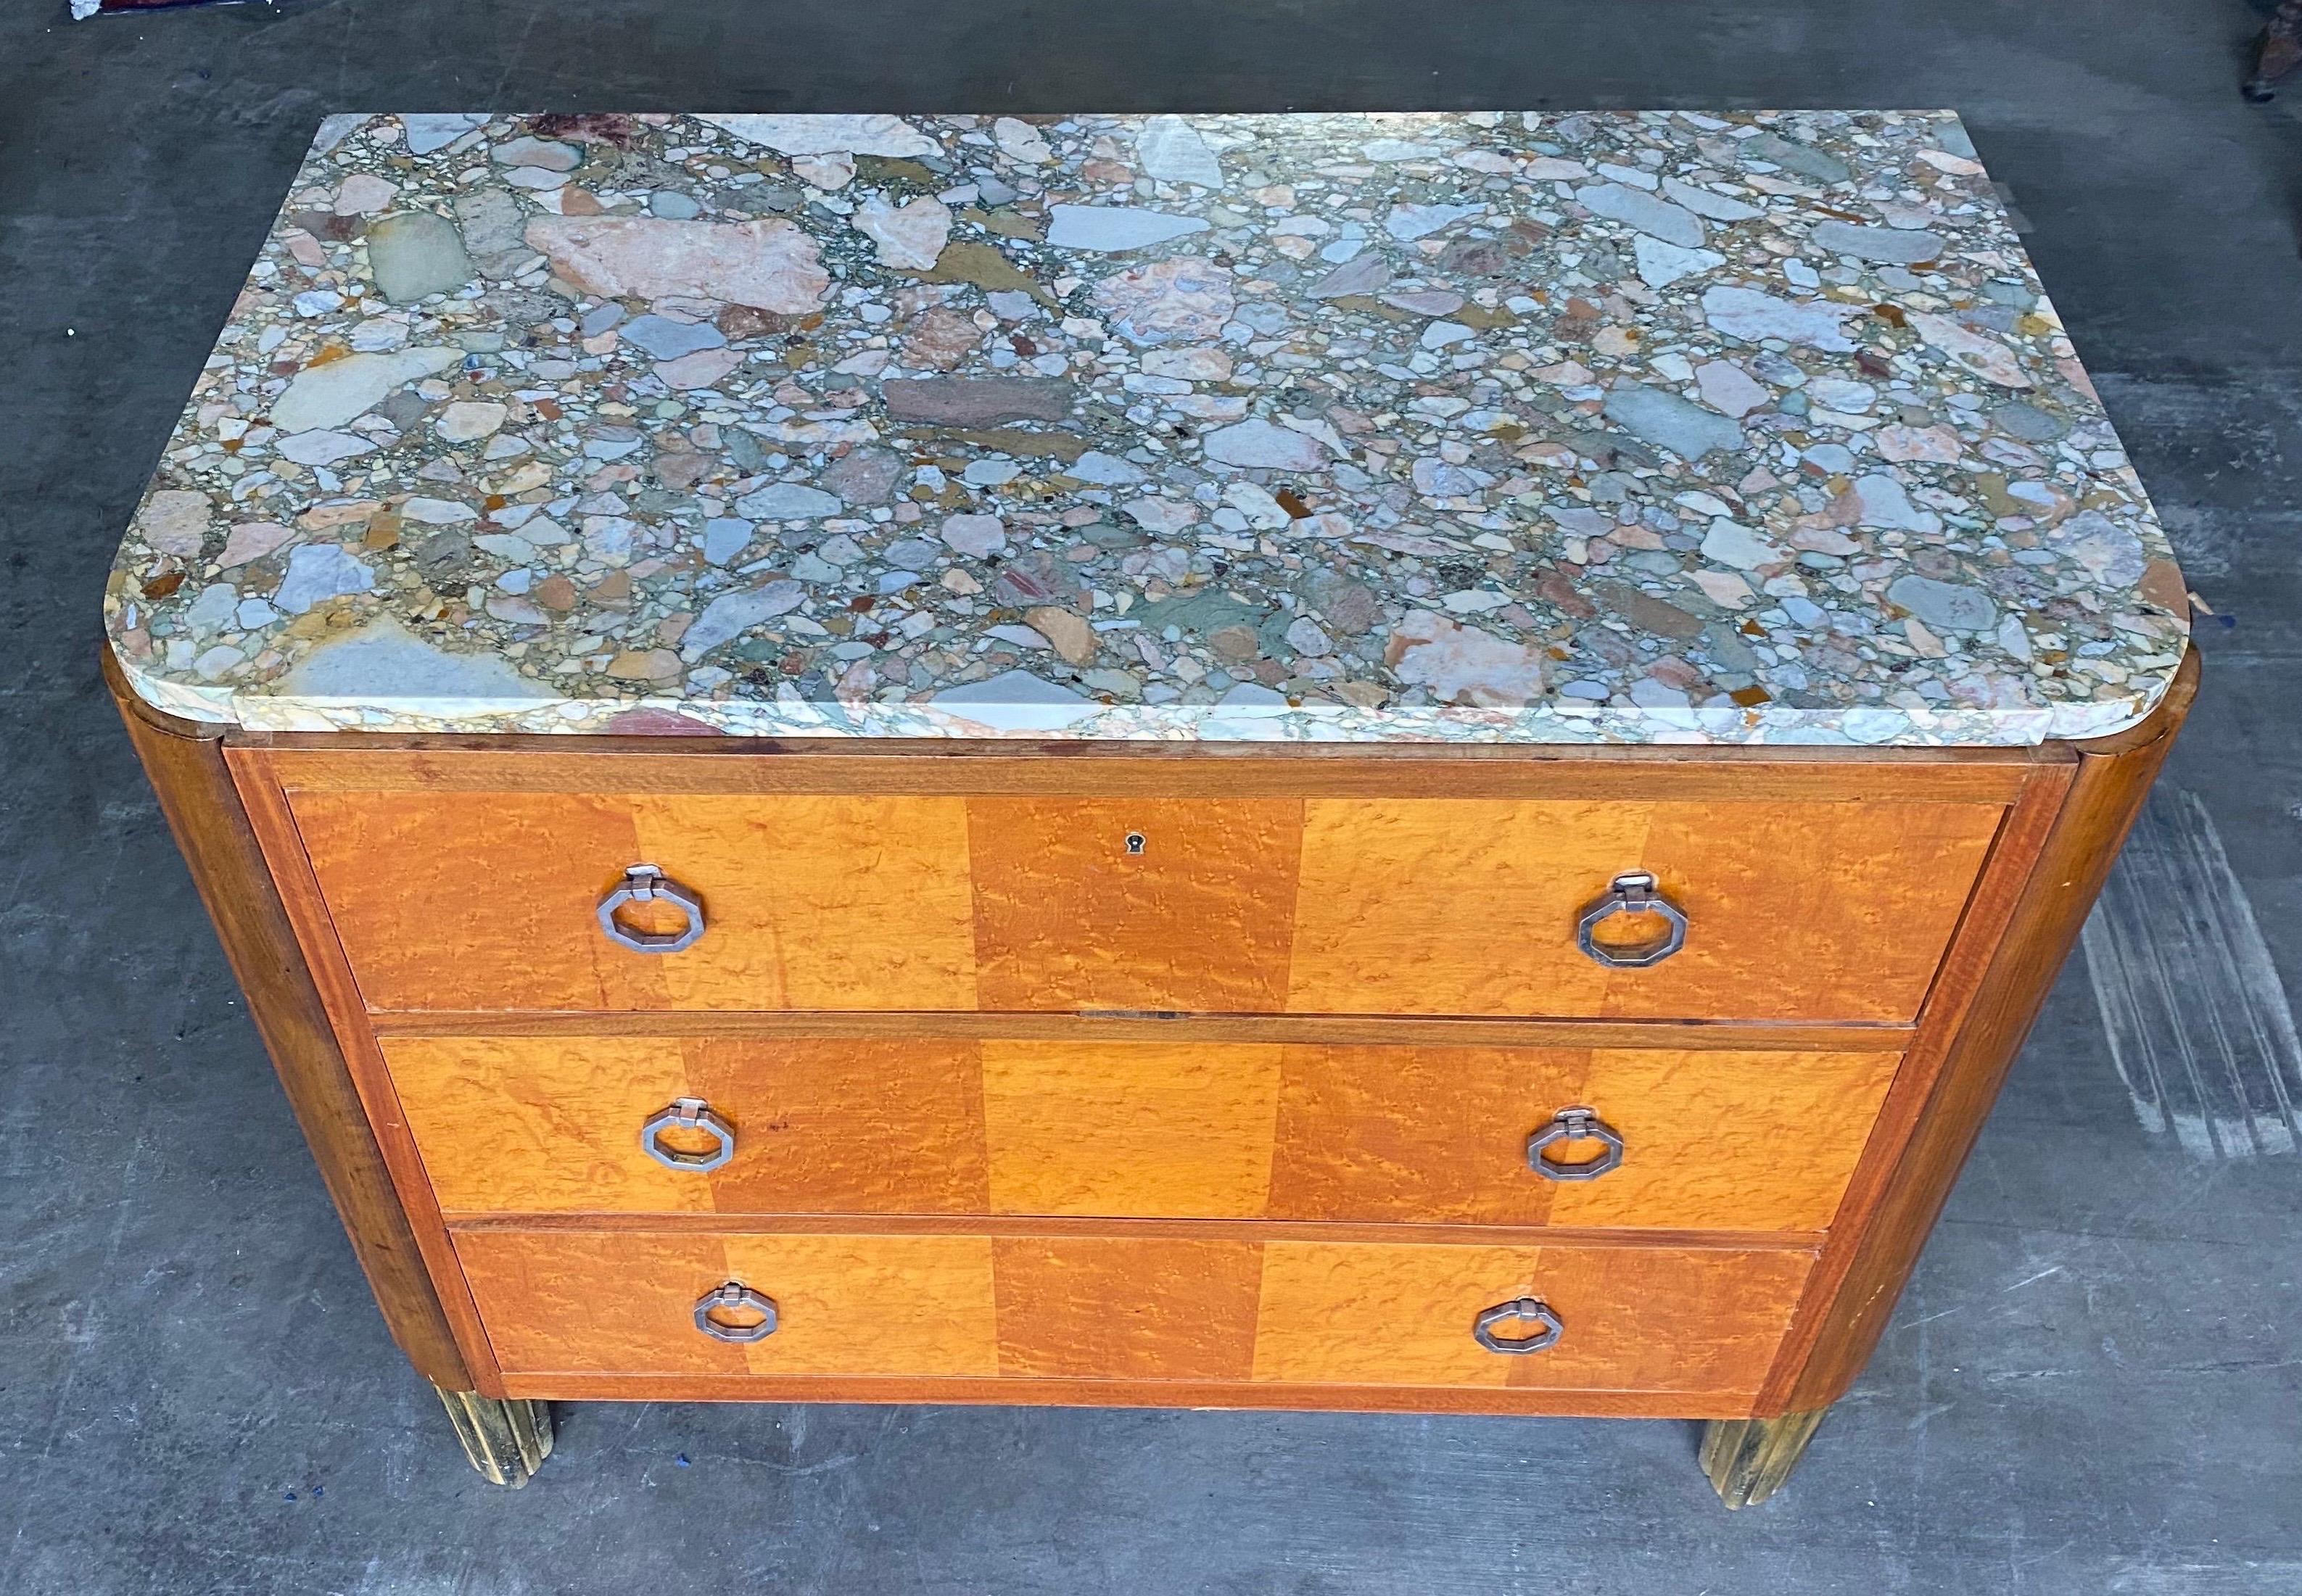 French art deco marble top 3 drawer chest on brass feet with key. Great inlay, heavily exaggerated reeded corners, shaped marble top. Very chic.